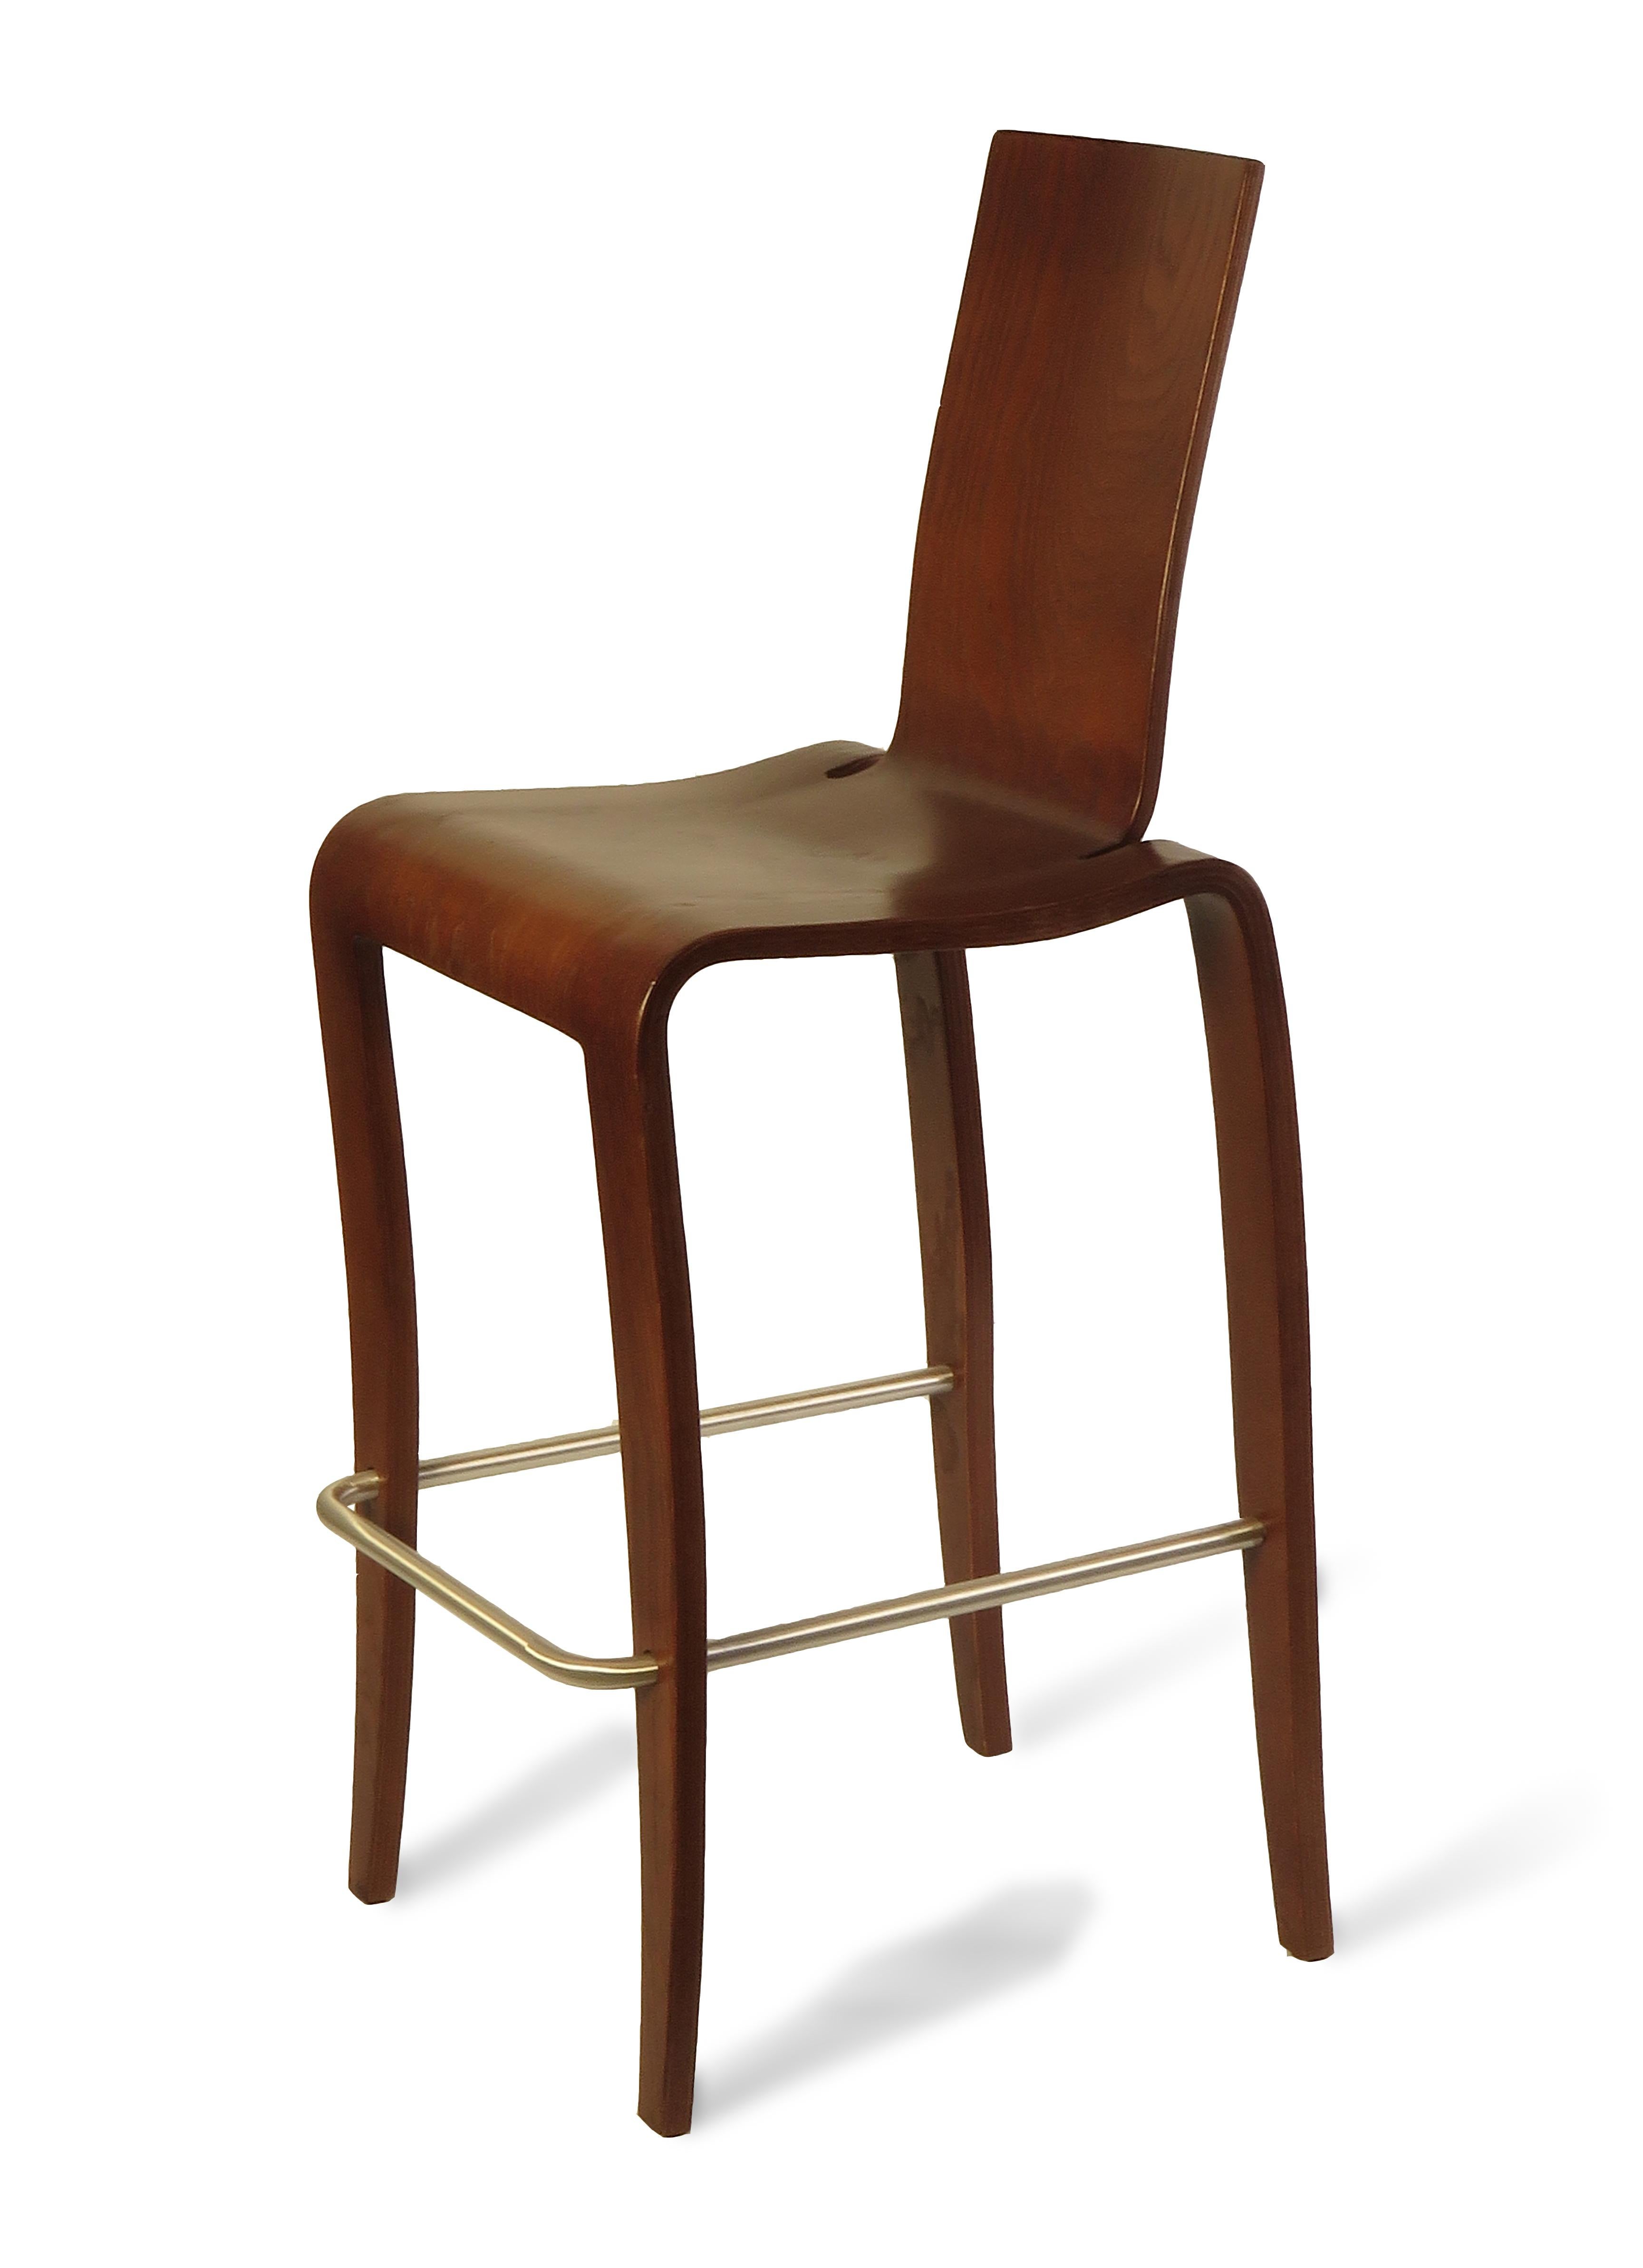 The Europa bar chair is signature Peter Danko aesthetic. The chair is molded to a single piece of maple plywood with maple face veneer, Finished in Walnut and featuring a sleek modern curve, these chairs offer comfort and sway gently with movement.